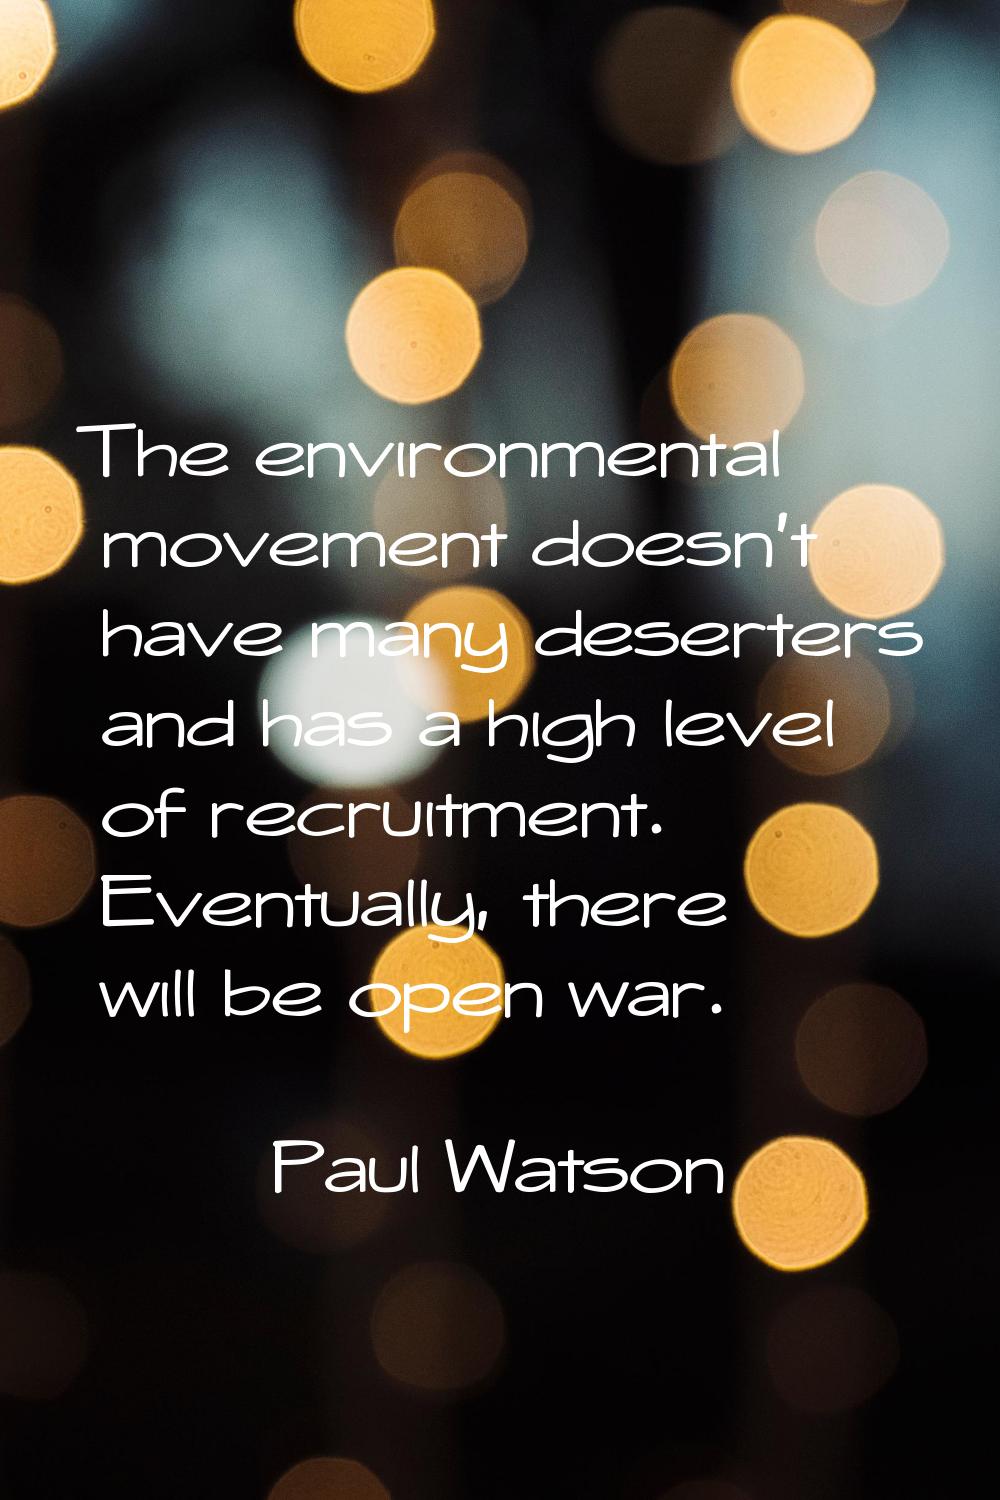 The environmental movement doesn't have many deserters and has a high level of recruitment. Eventua